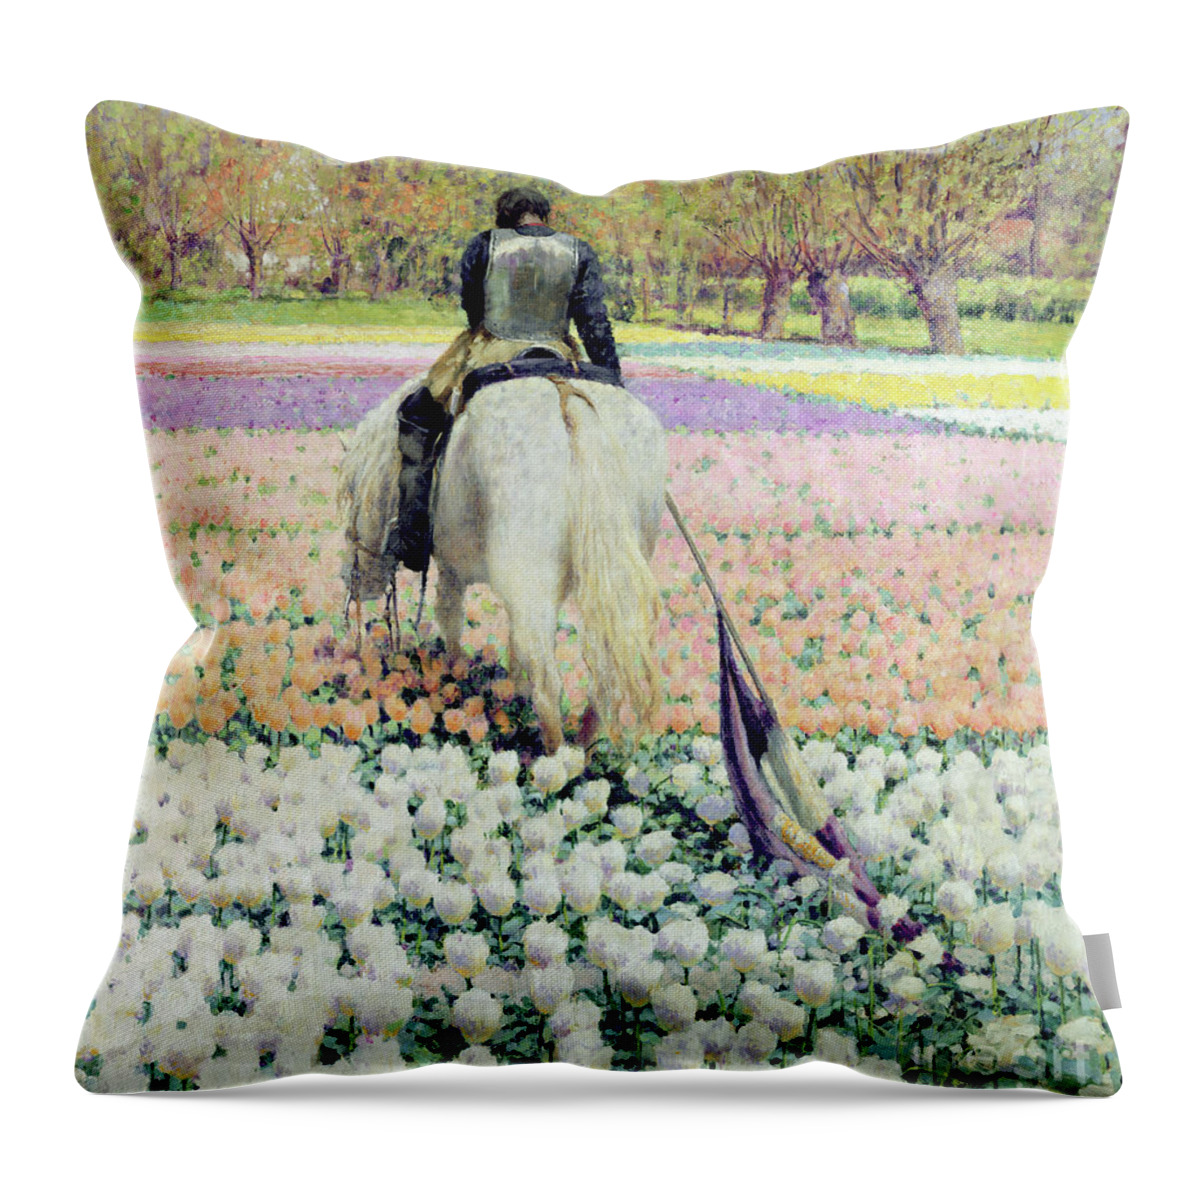 Vanquished Throw Pillow featuring the painting Vanquished by George Hitchcock